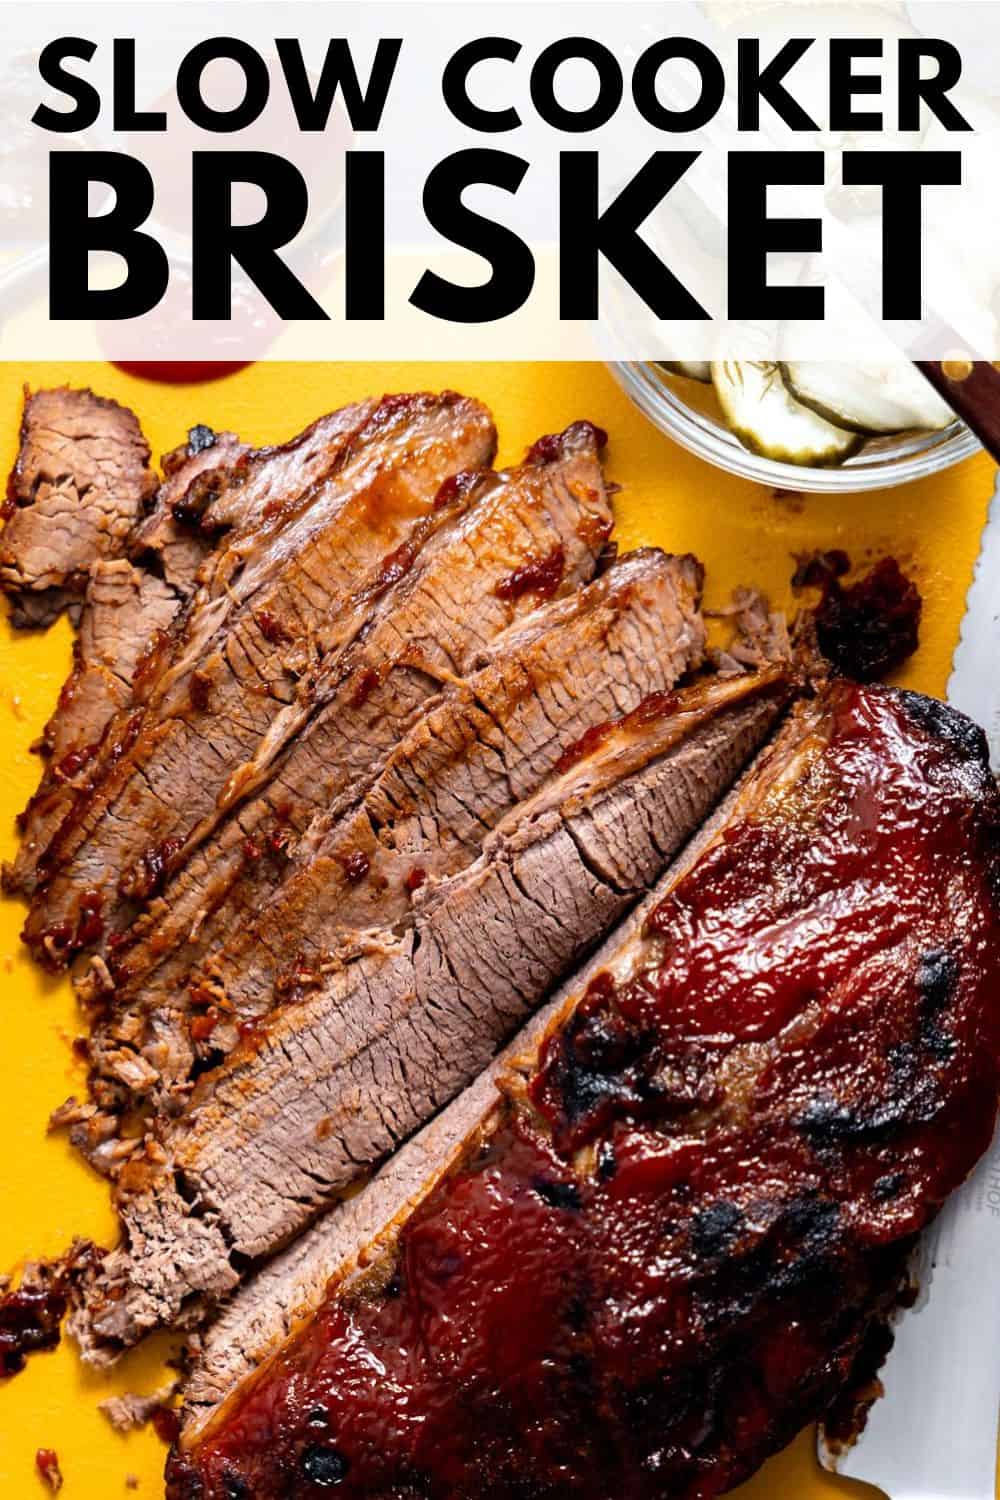 Slow cooker beef brisket with text.